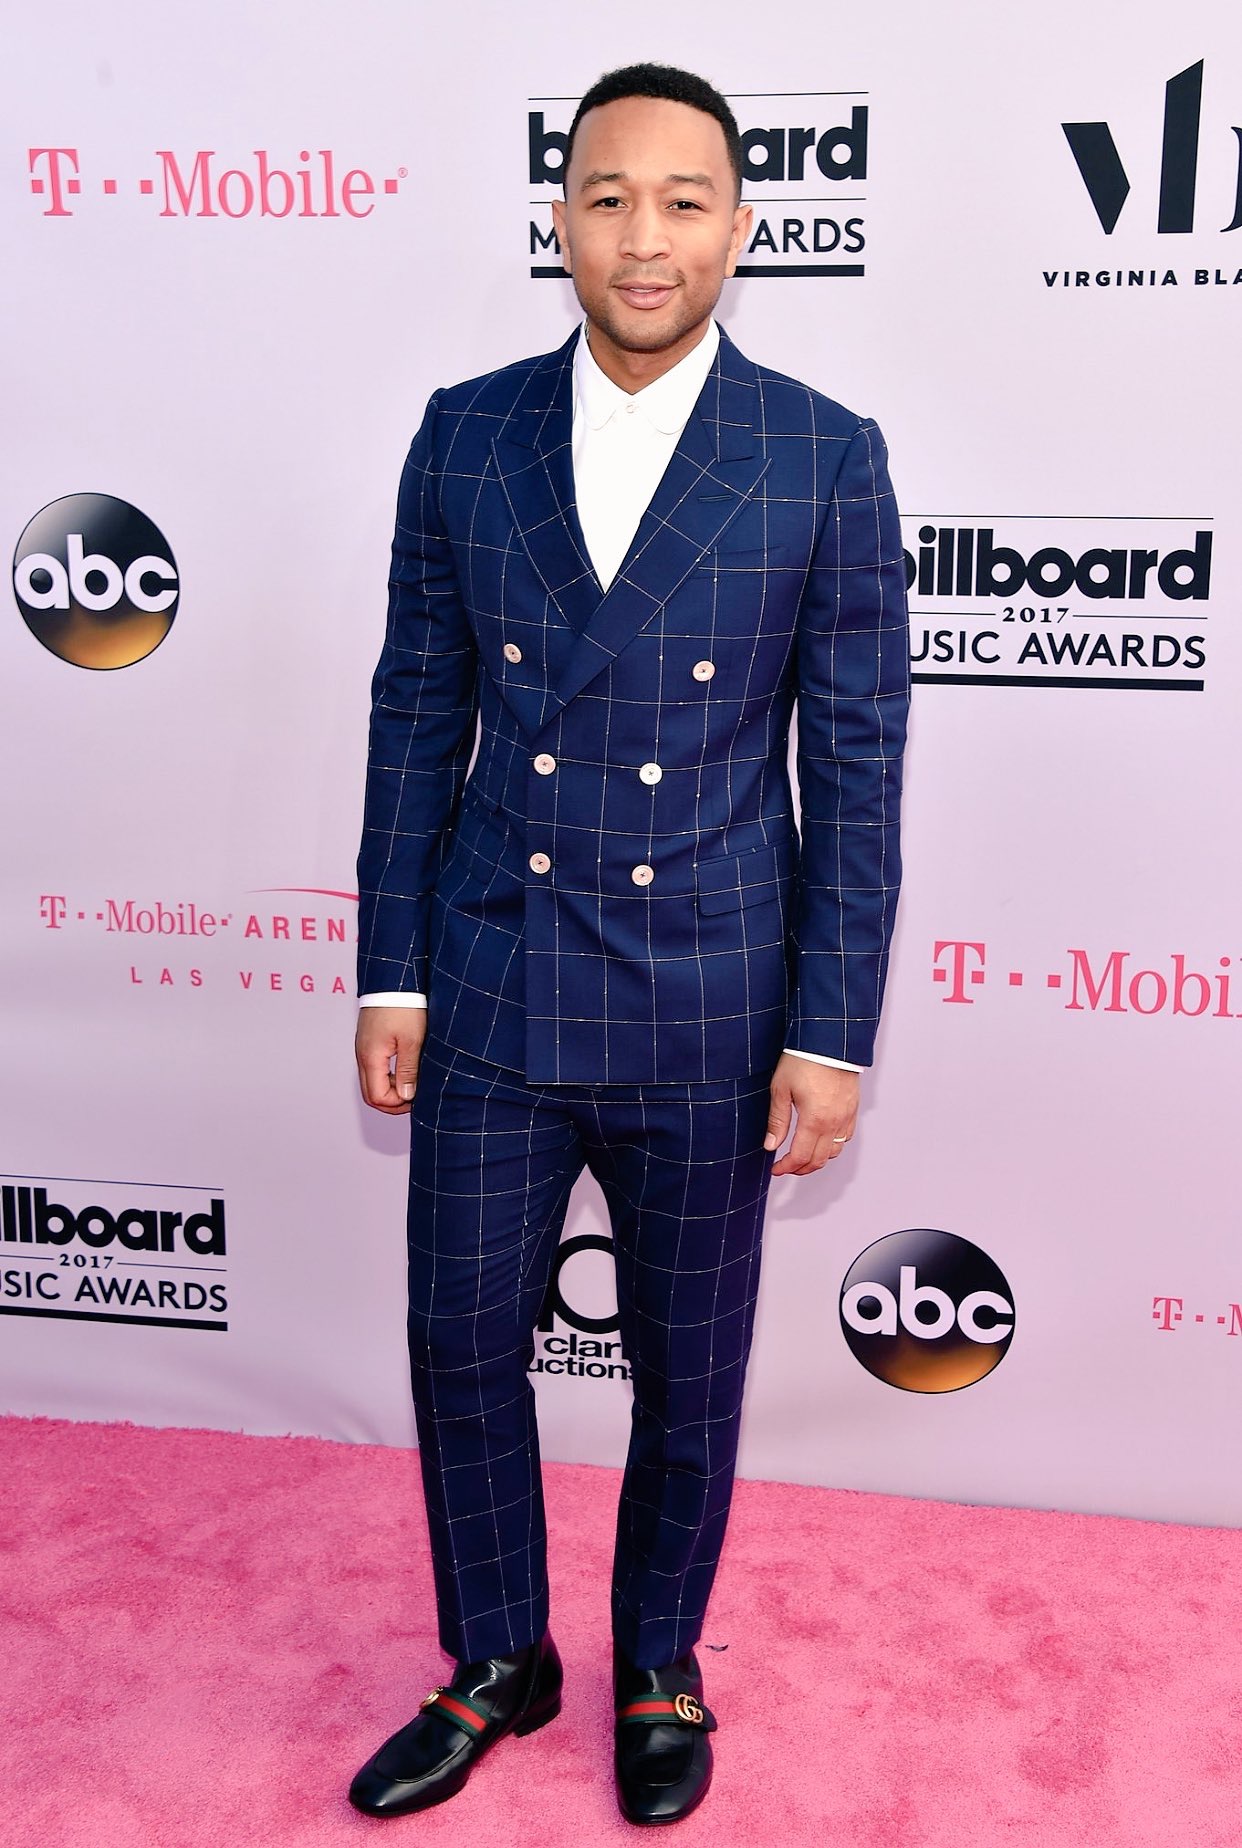 Spotted: John Legend Wears Gucci Suit & Loafers at Billboard Music Awards 2017